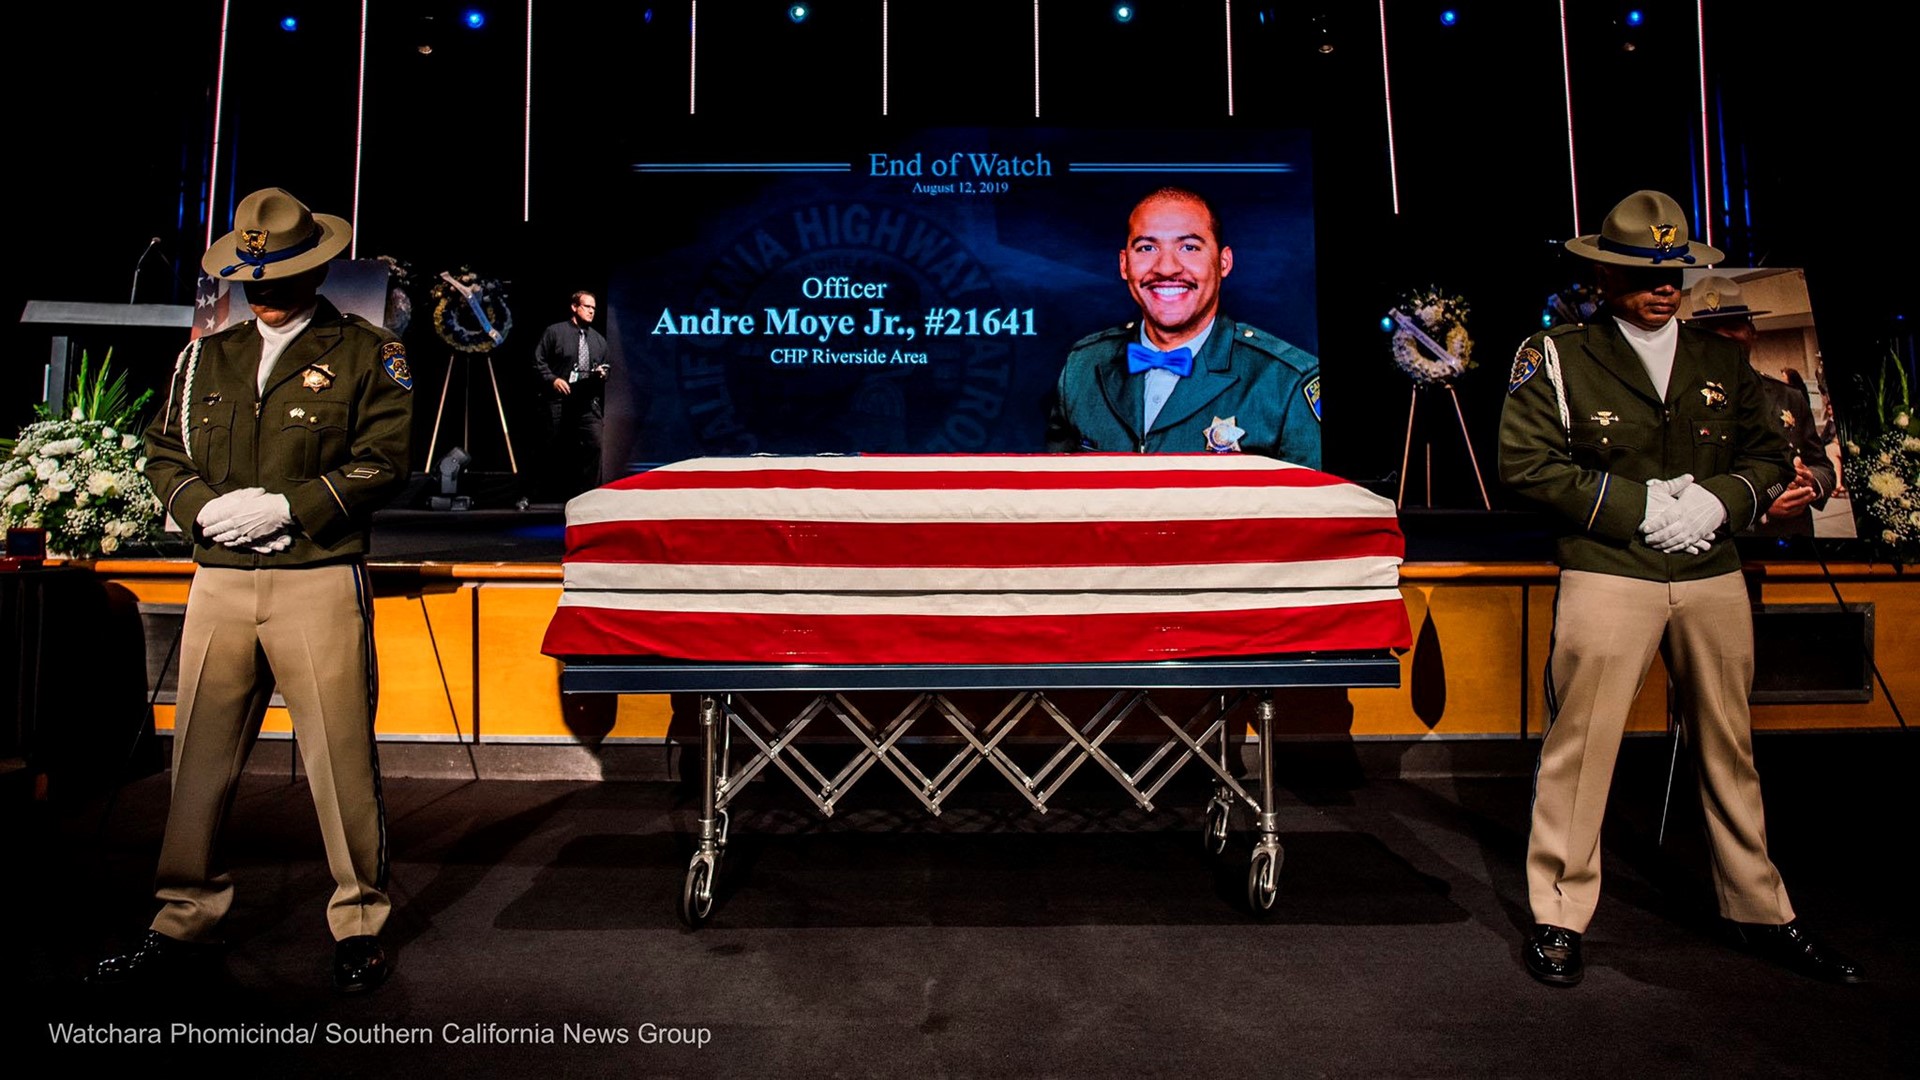 The public was invited to attend the service for Andre Moye, Jr. at Harvest Christian Fellowship in Riverside, east of Los Angeles.